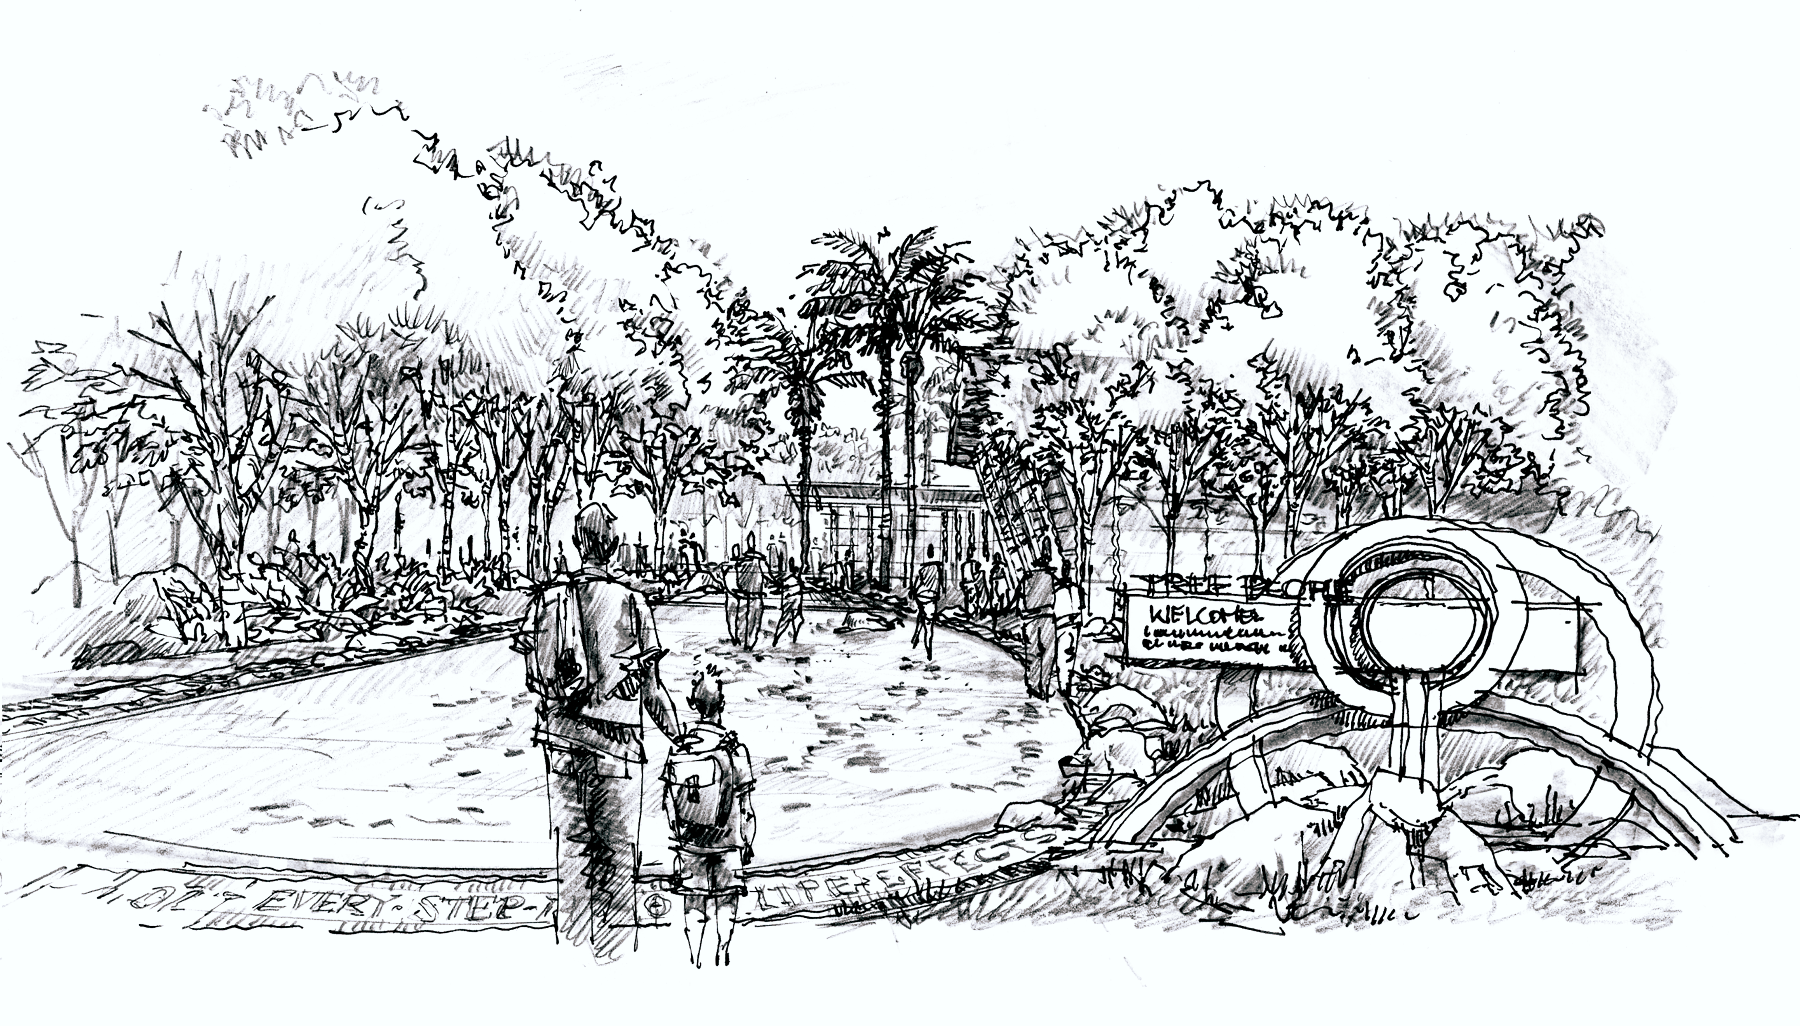 TreePeople Community Center Concept Sketch